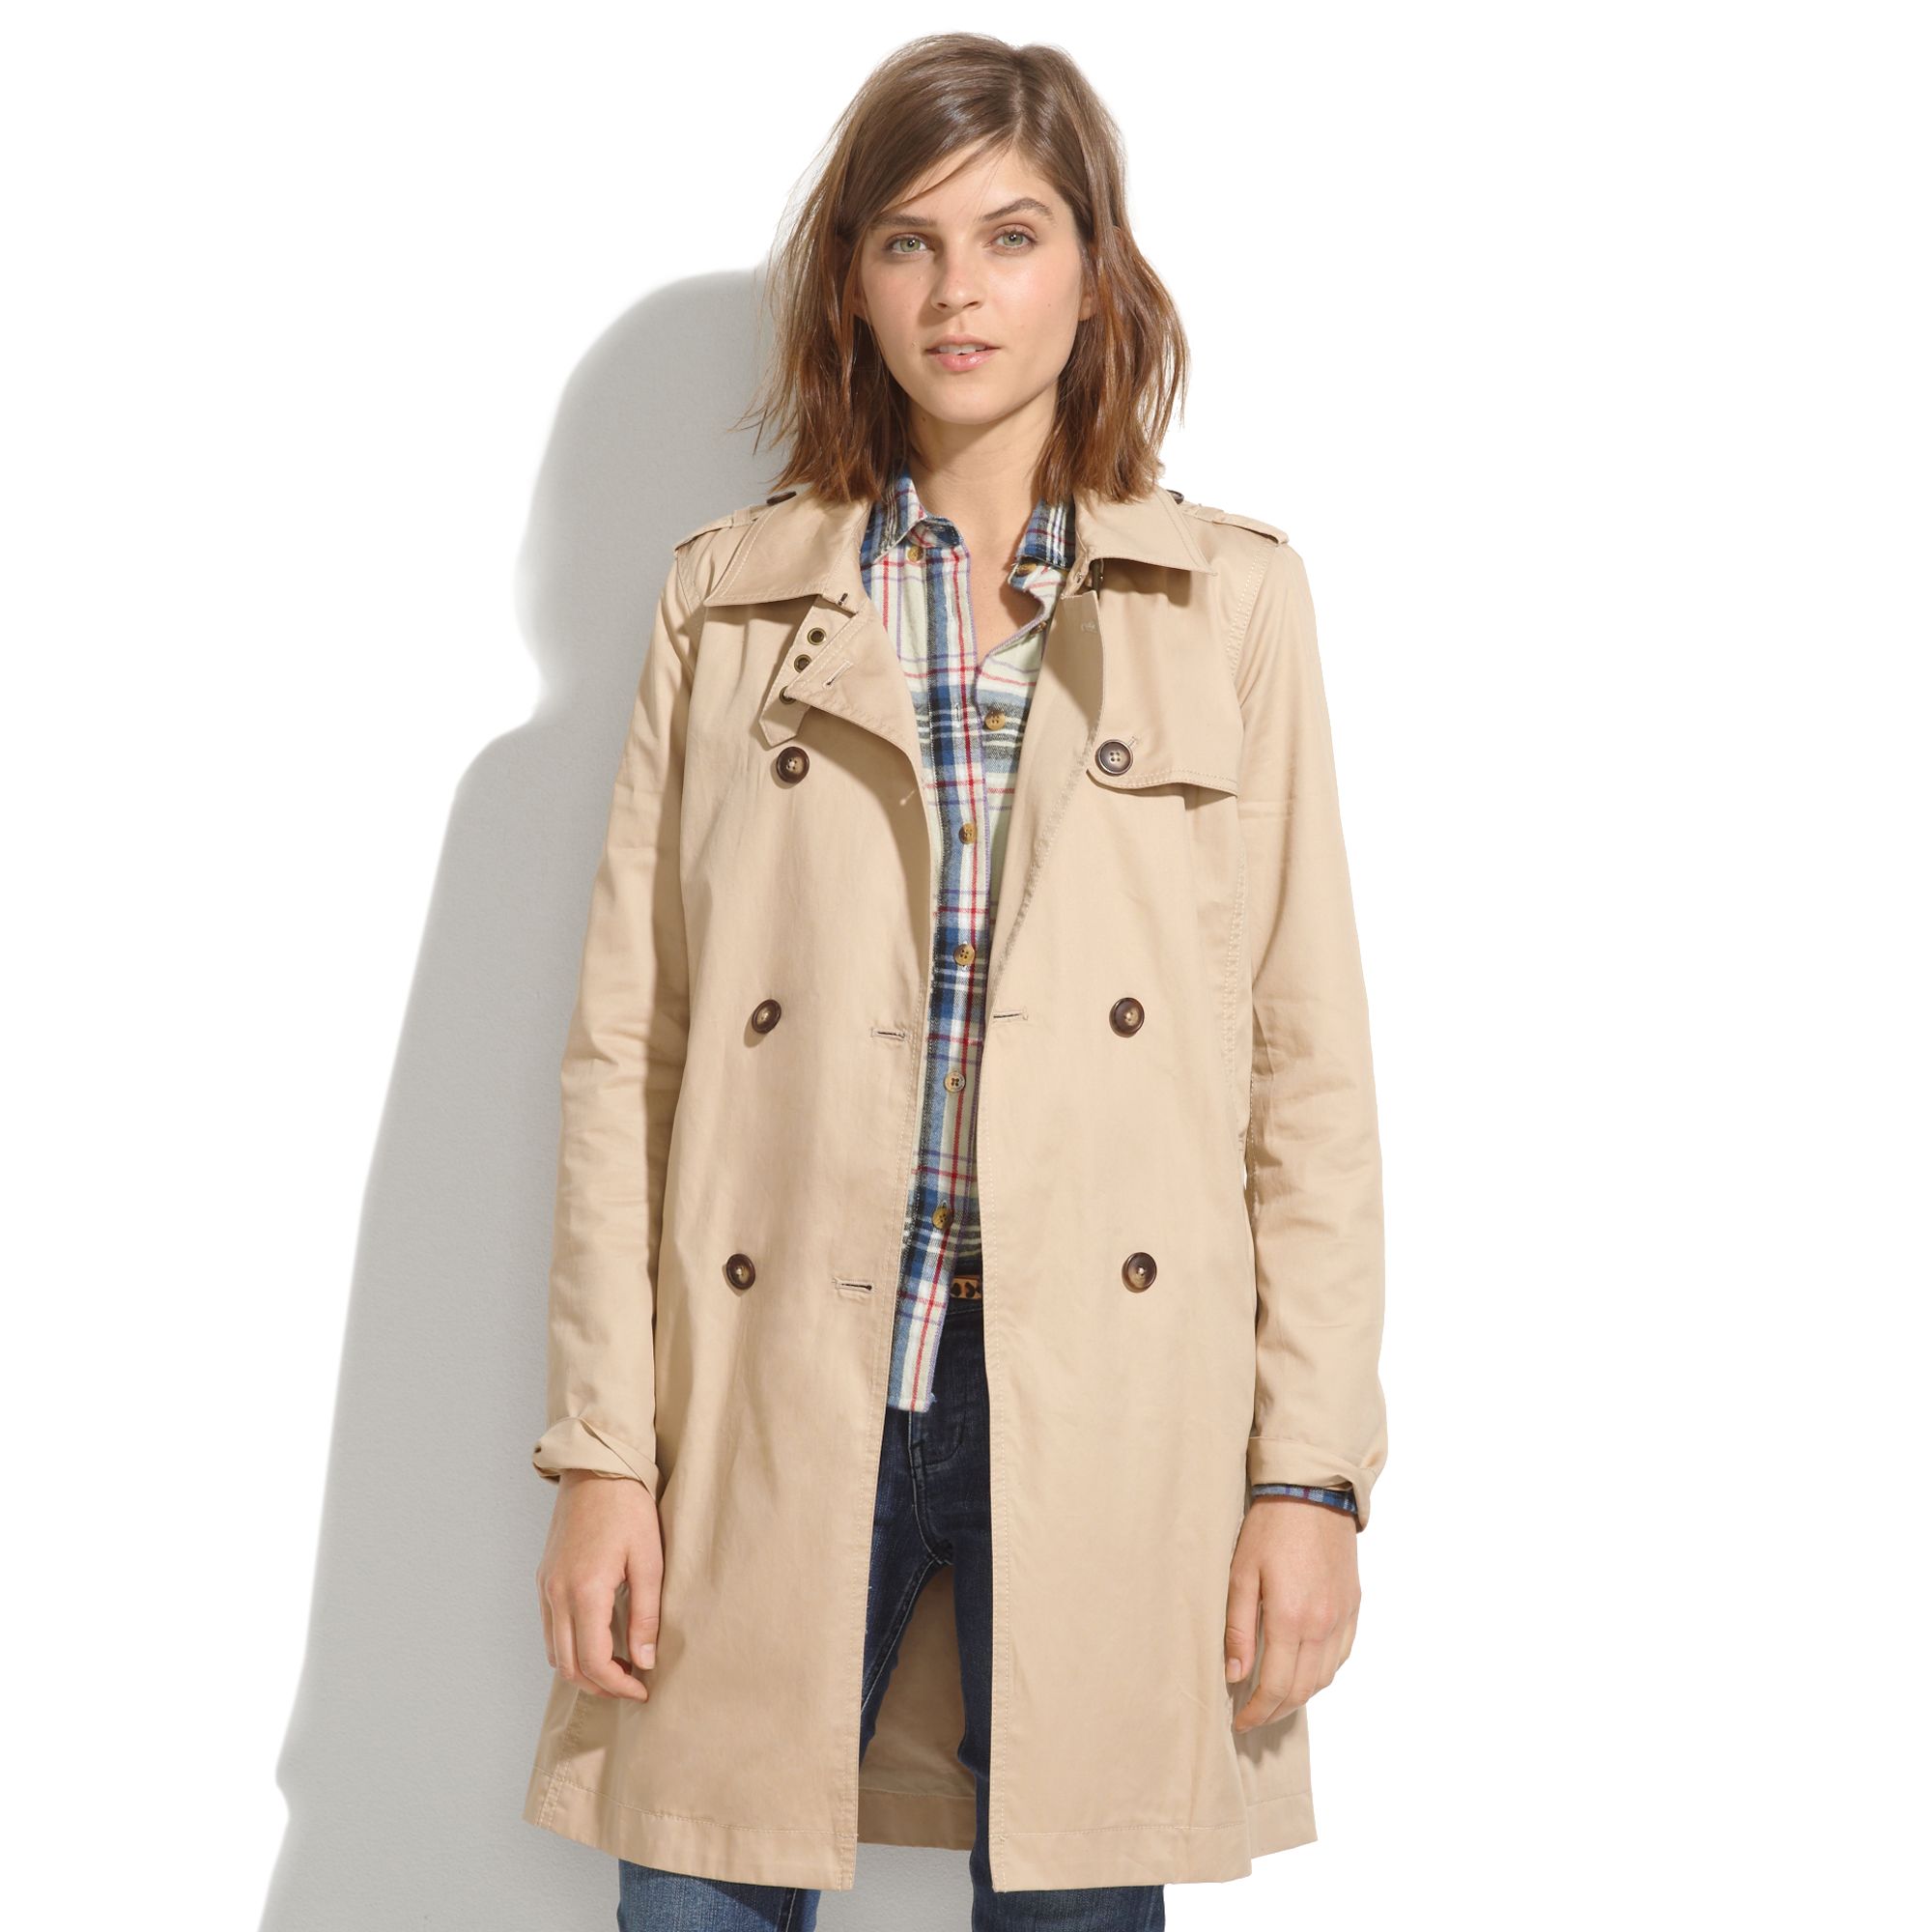 Lyst - Madewell Belted Trench in Natural